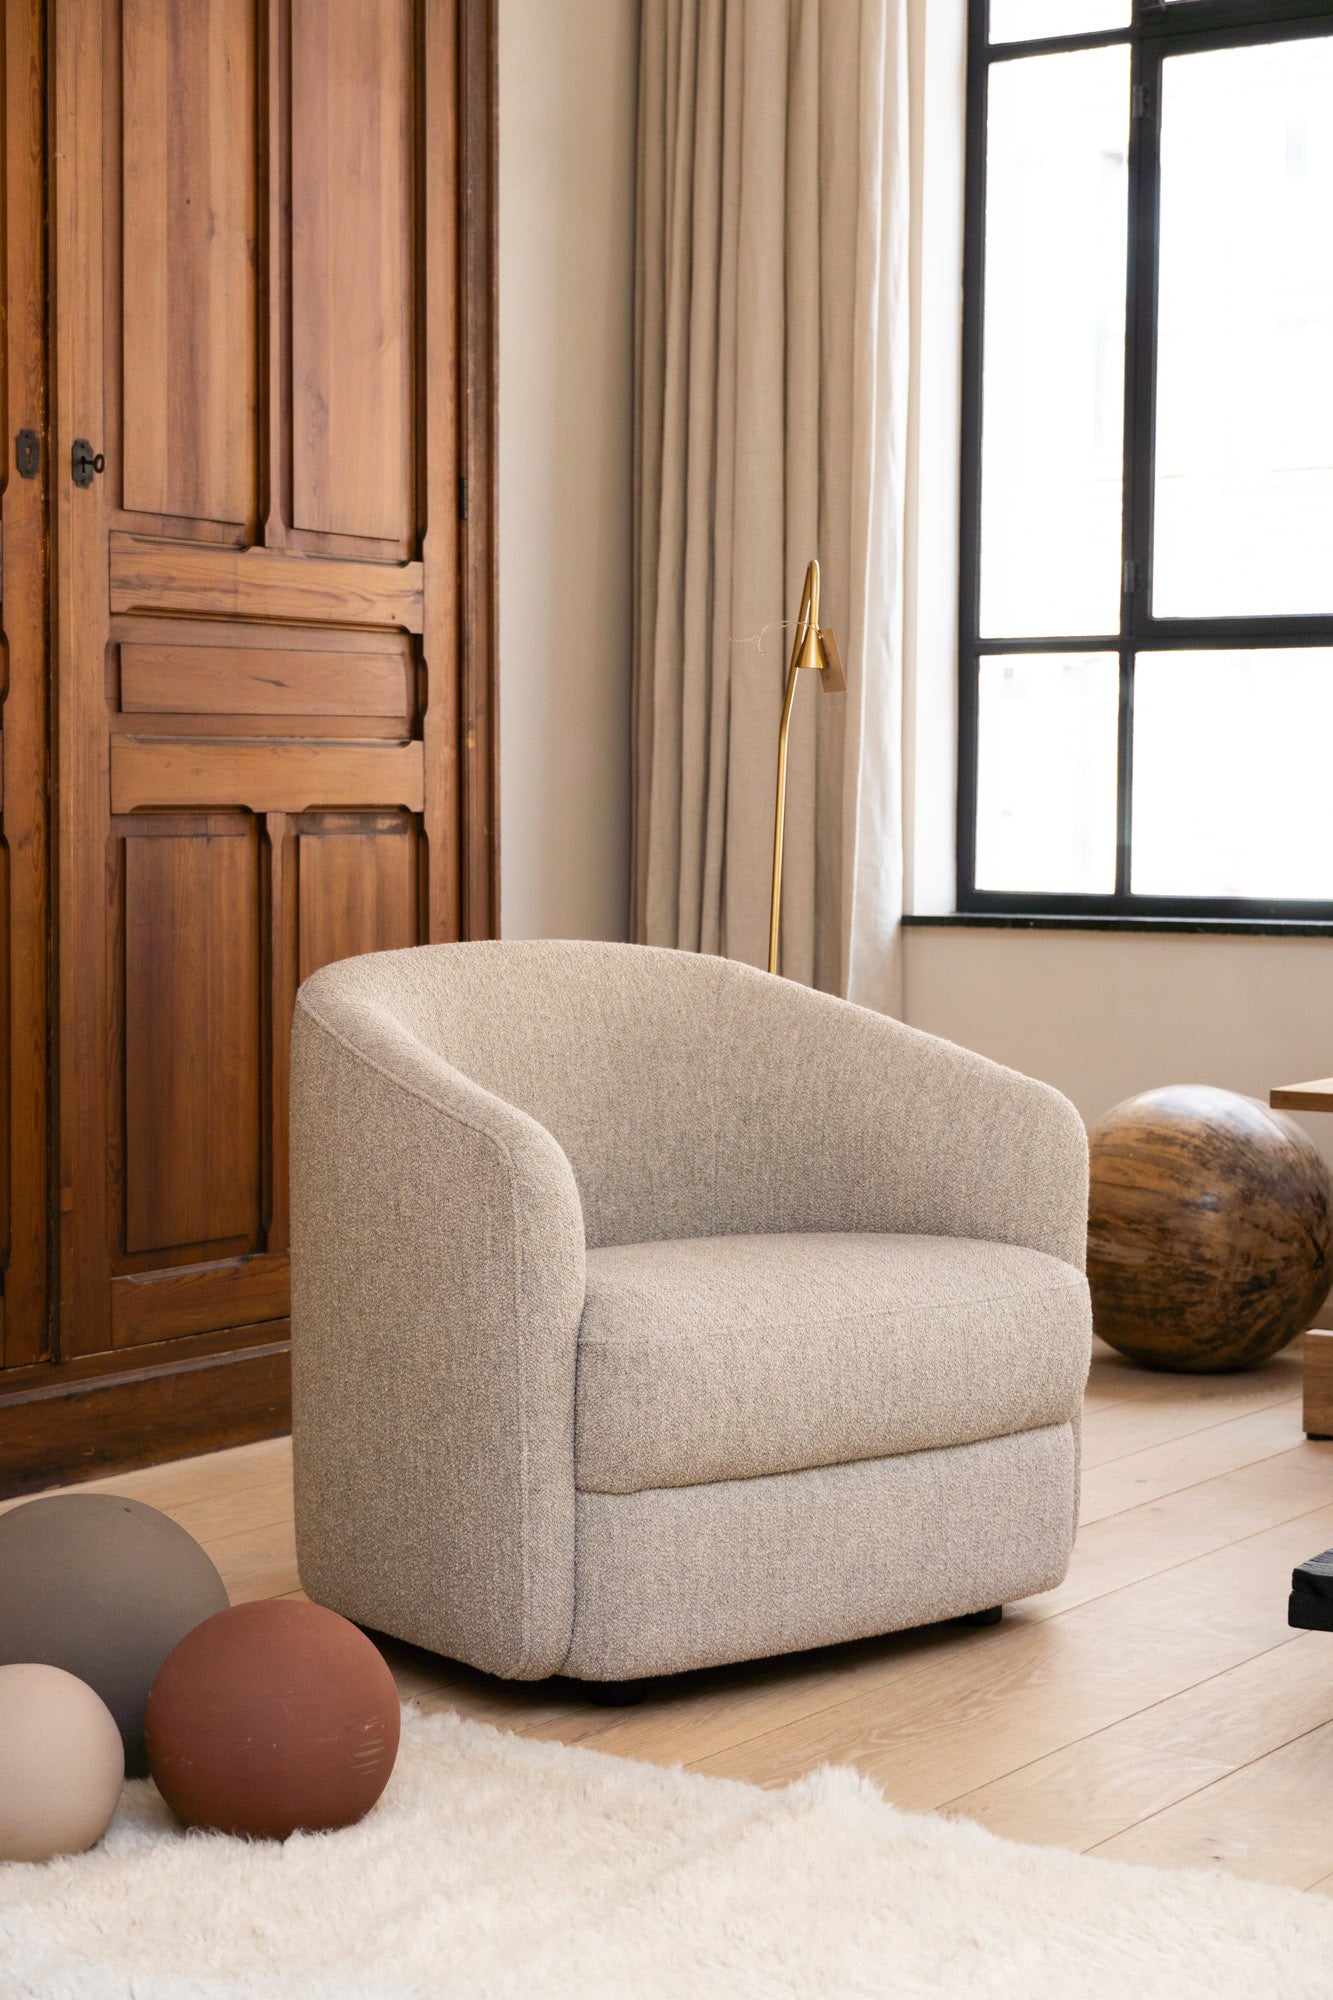 Side view Covent Lounge Chair set in a light and neutral interior at Enter The Loft.